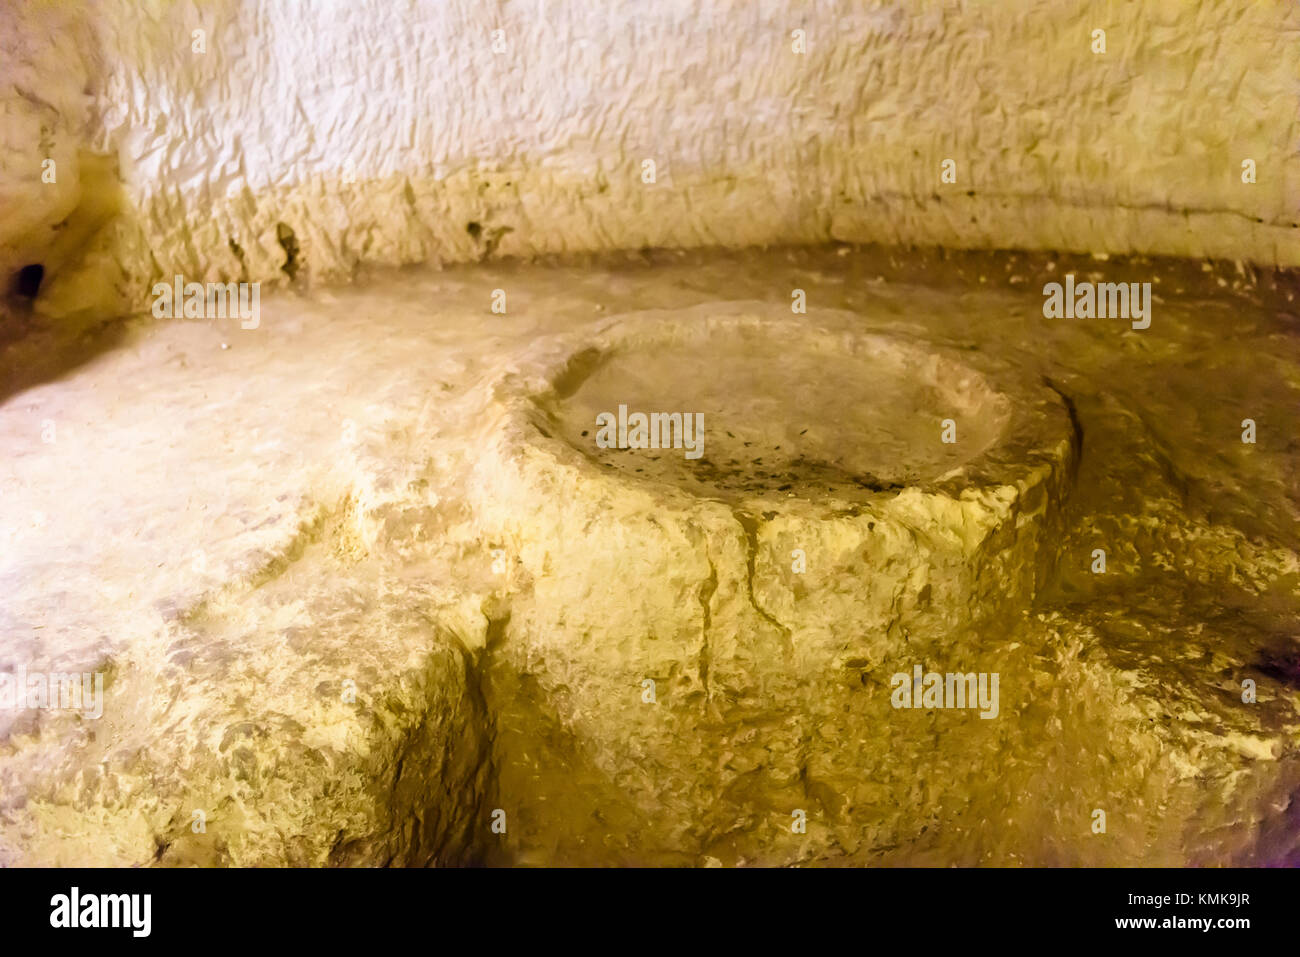 The Agape Table, St. Paul's underground catacombs, Mdina, Malta, used to have 'Living Meals' with the dead. Stock Photo